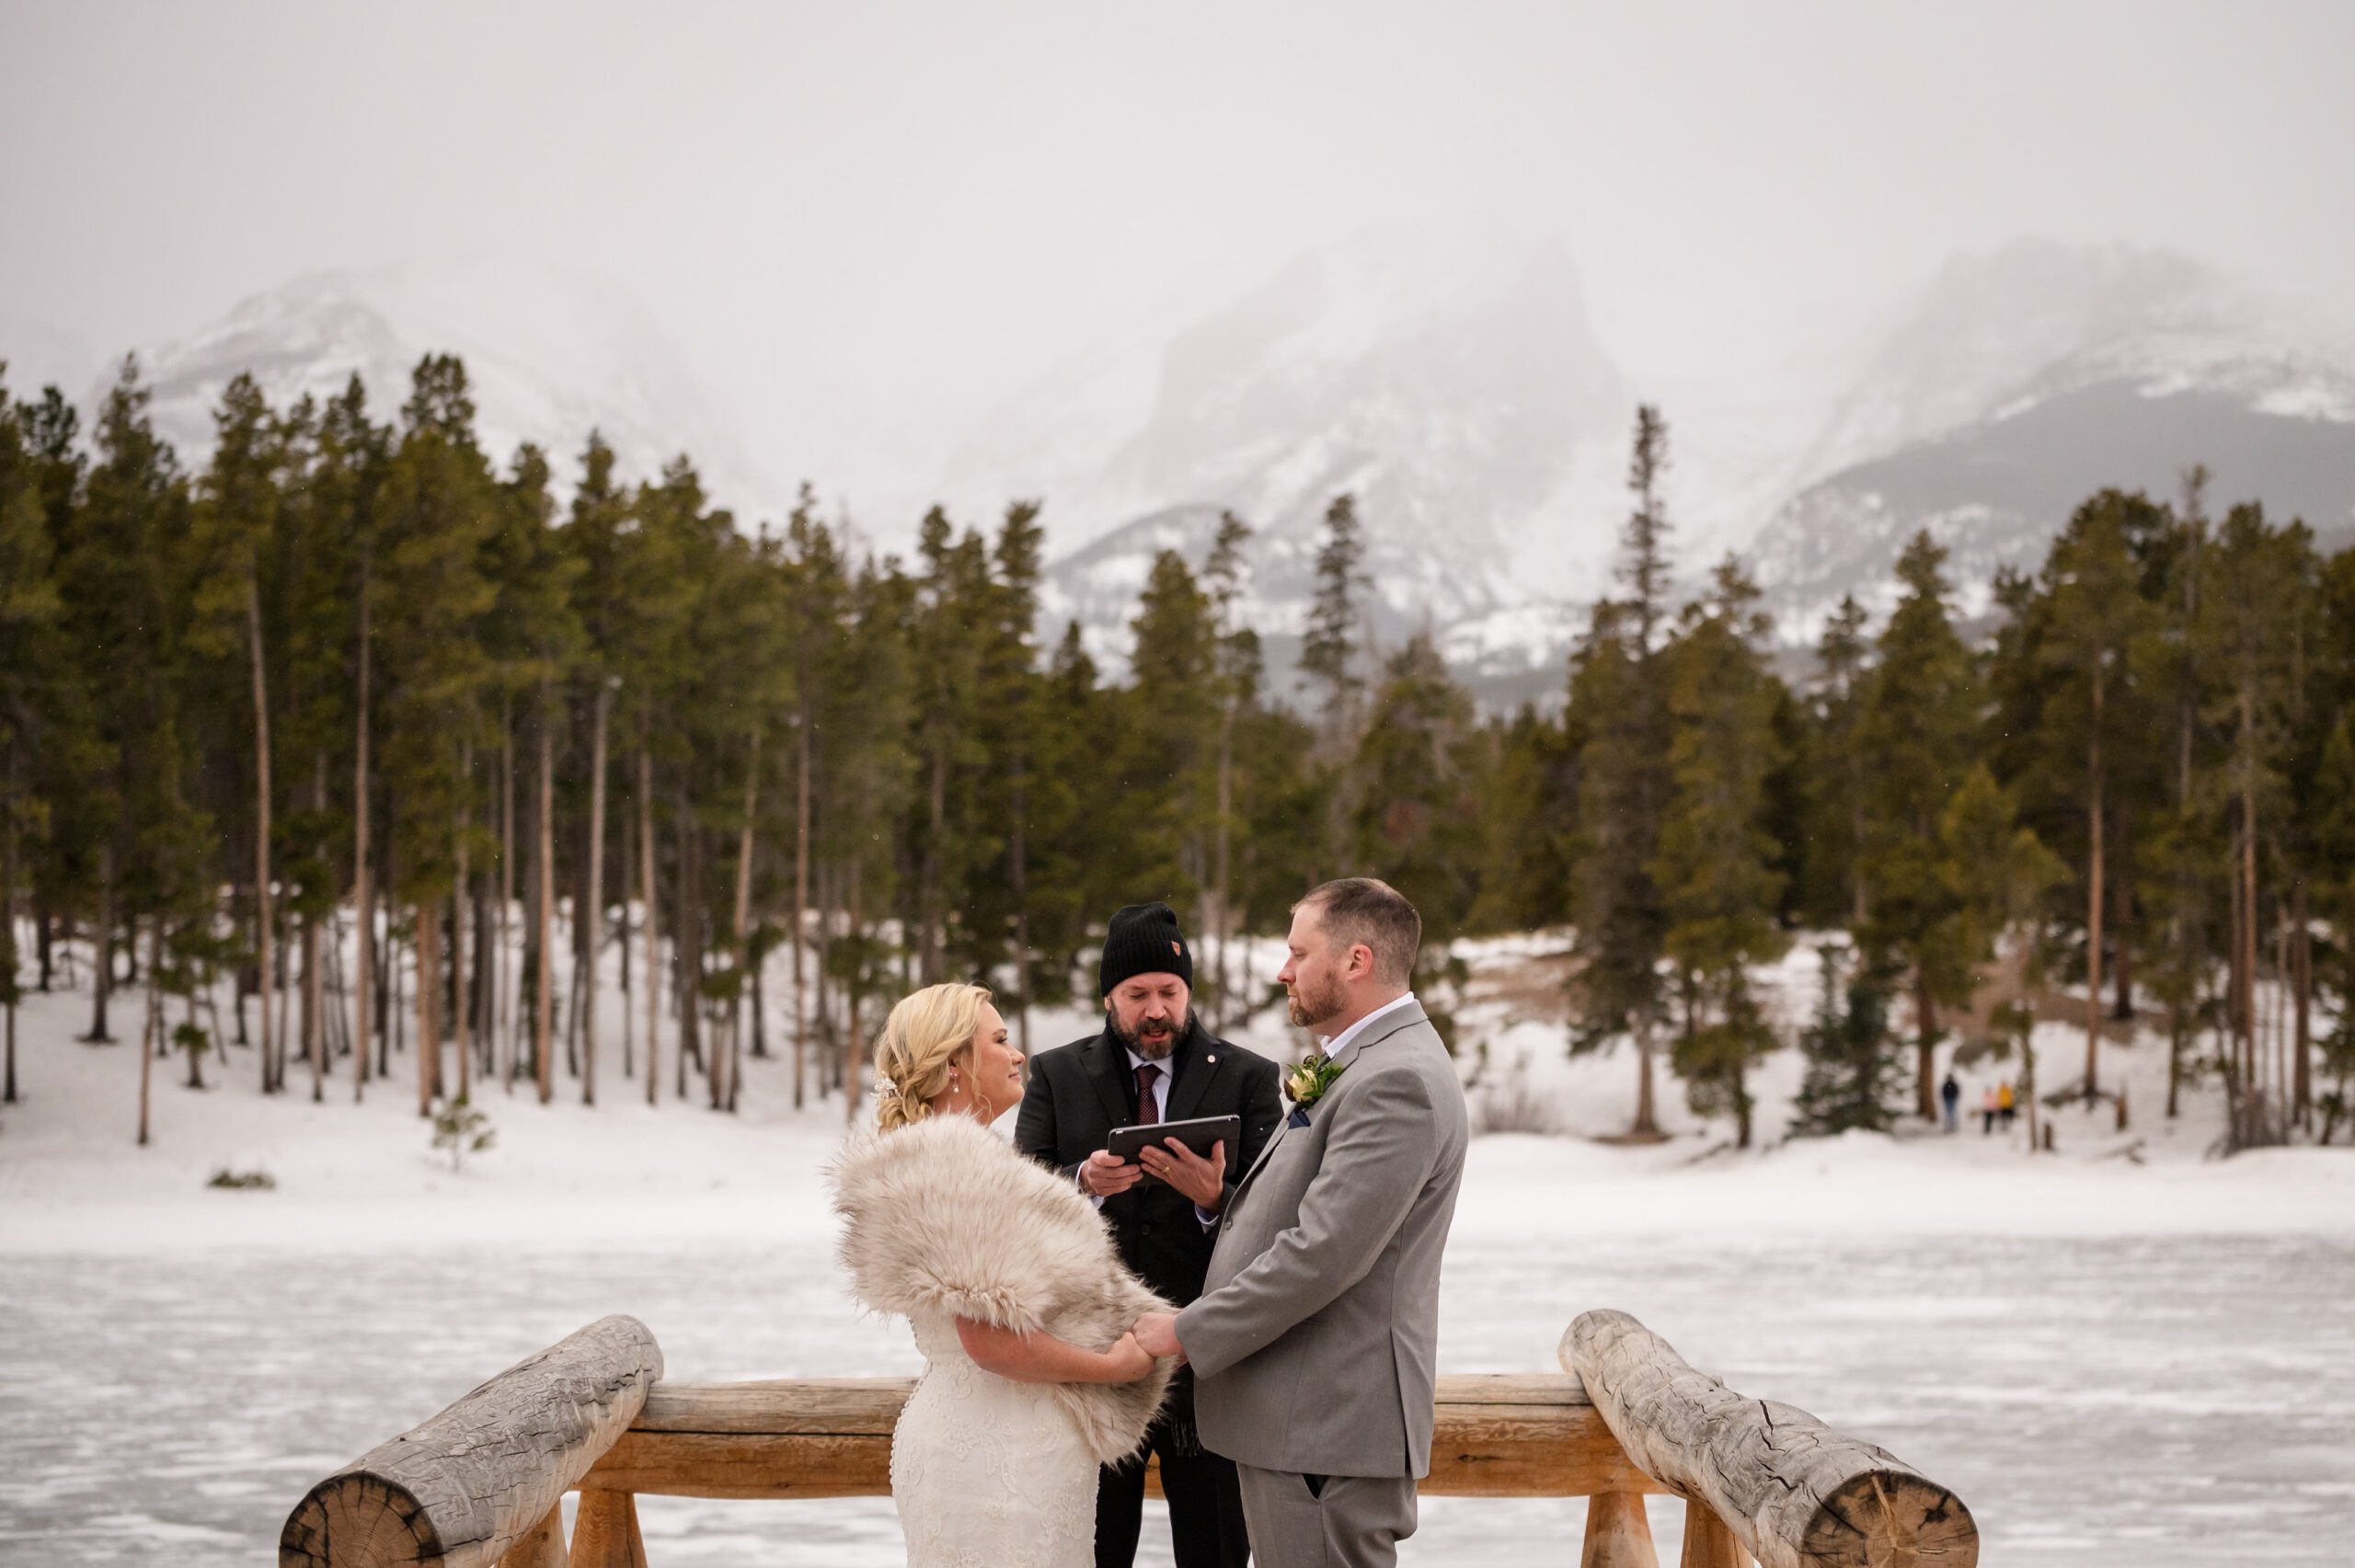 the bride and groom looking sweetly at each other during their Winter Elopement ceremony at Sprague Lake.  